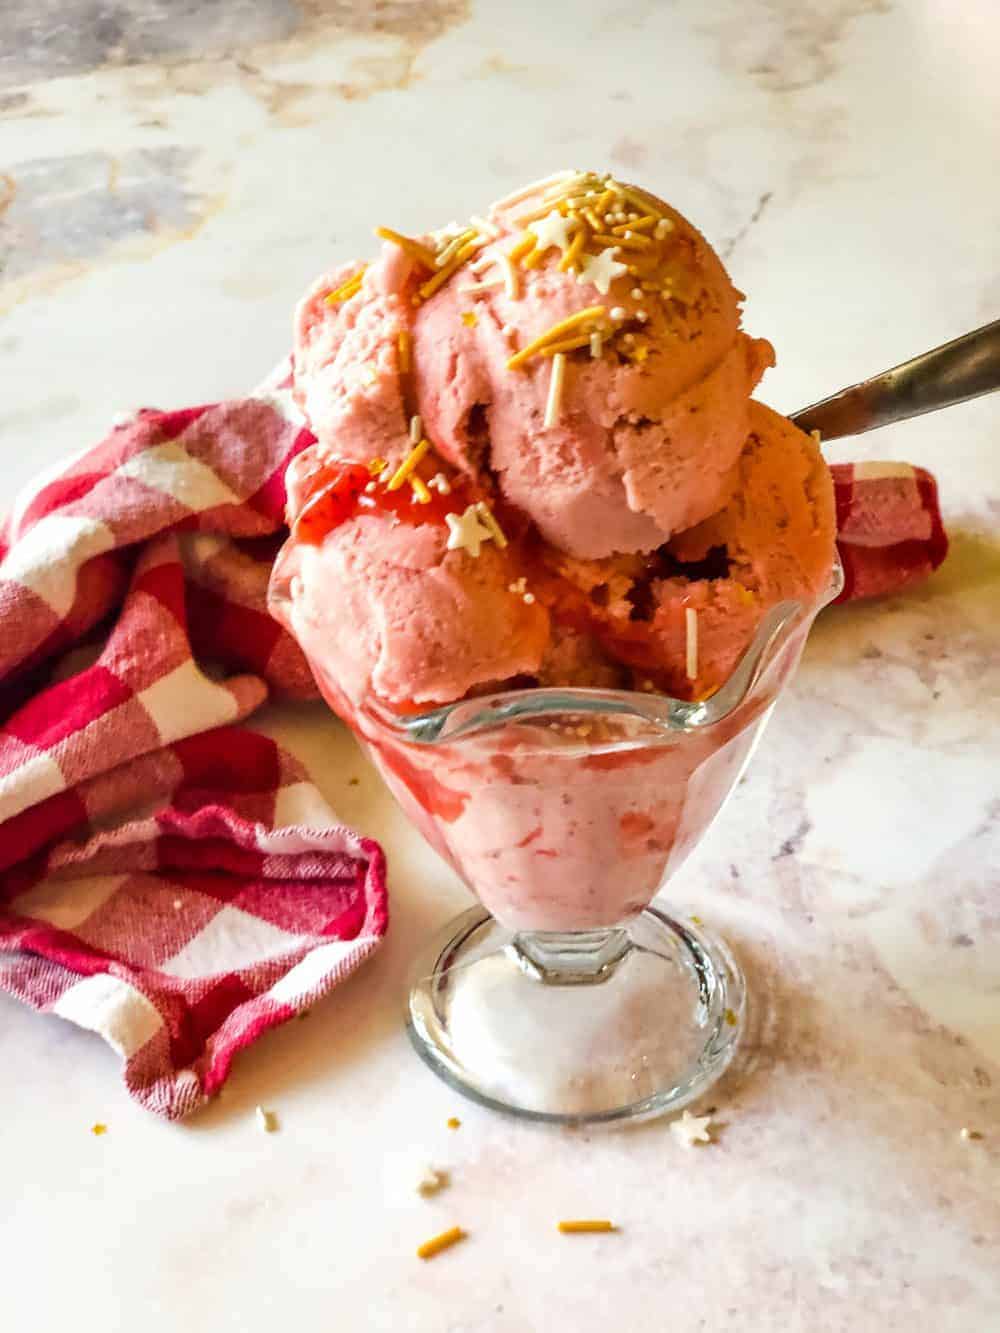 ice cream dish with scoops of strawberry banana ice cream and sprinkles on top